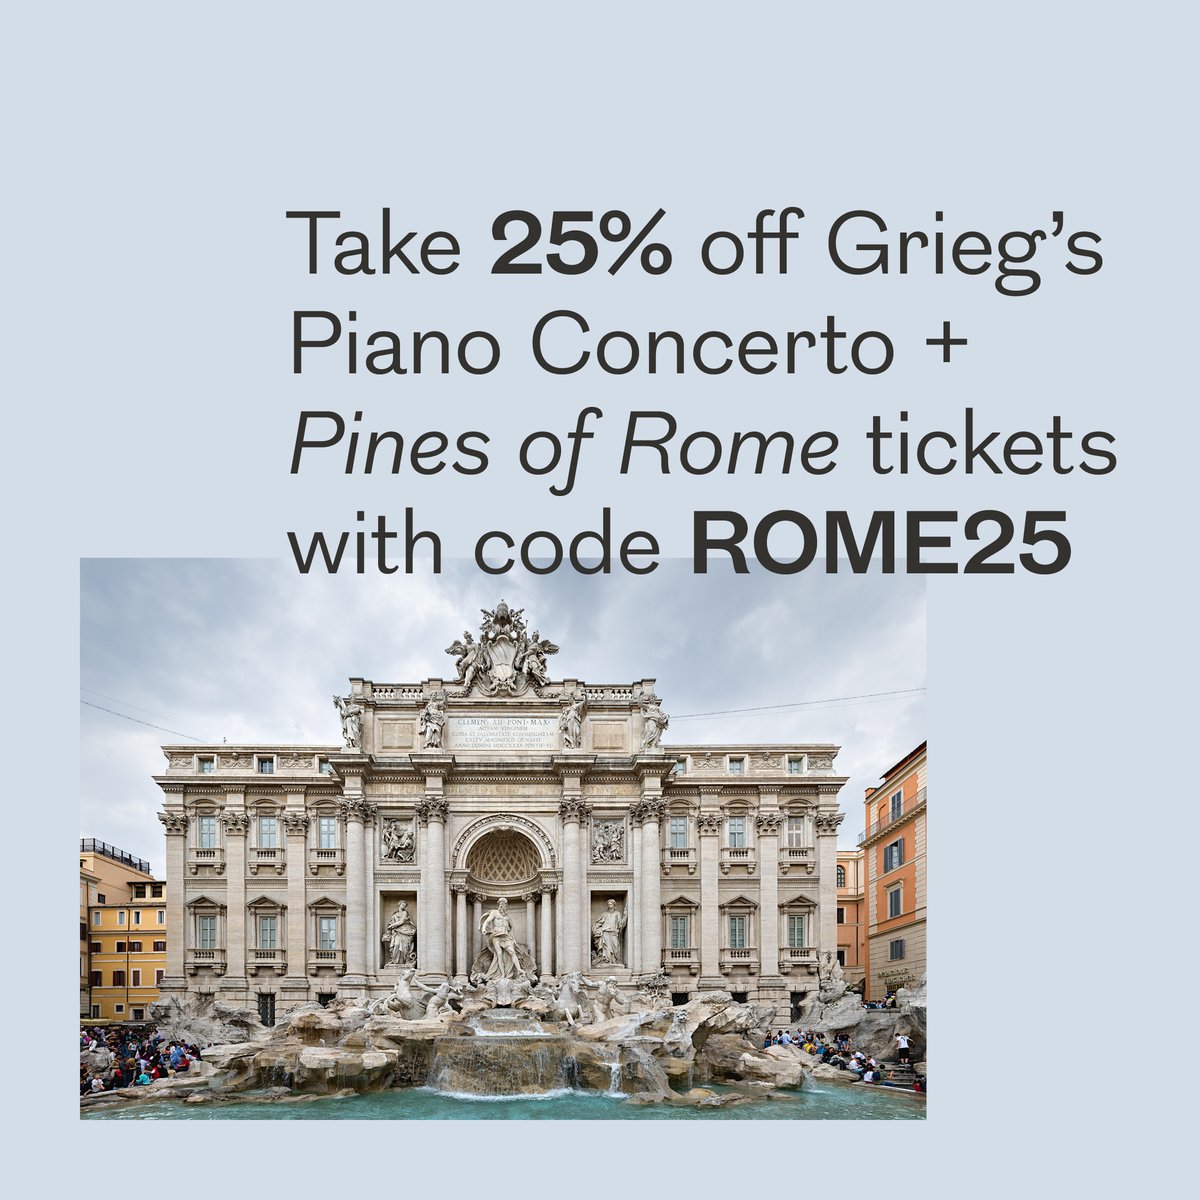 🎉🏛️ Celebrate the birth of Rome with a sale fit for emperors and goddesses! Take 25% off Grieg's Piano Concerto + 'Pines of Rome' tickets with code ROME25 now through April 30! 🎫 More information on the concert here >> bit.ly/49AxbB2